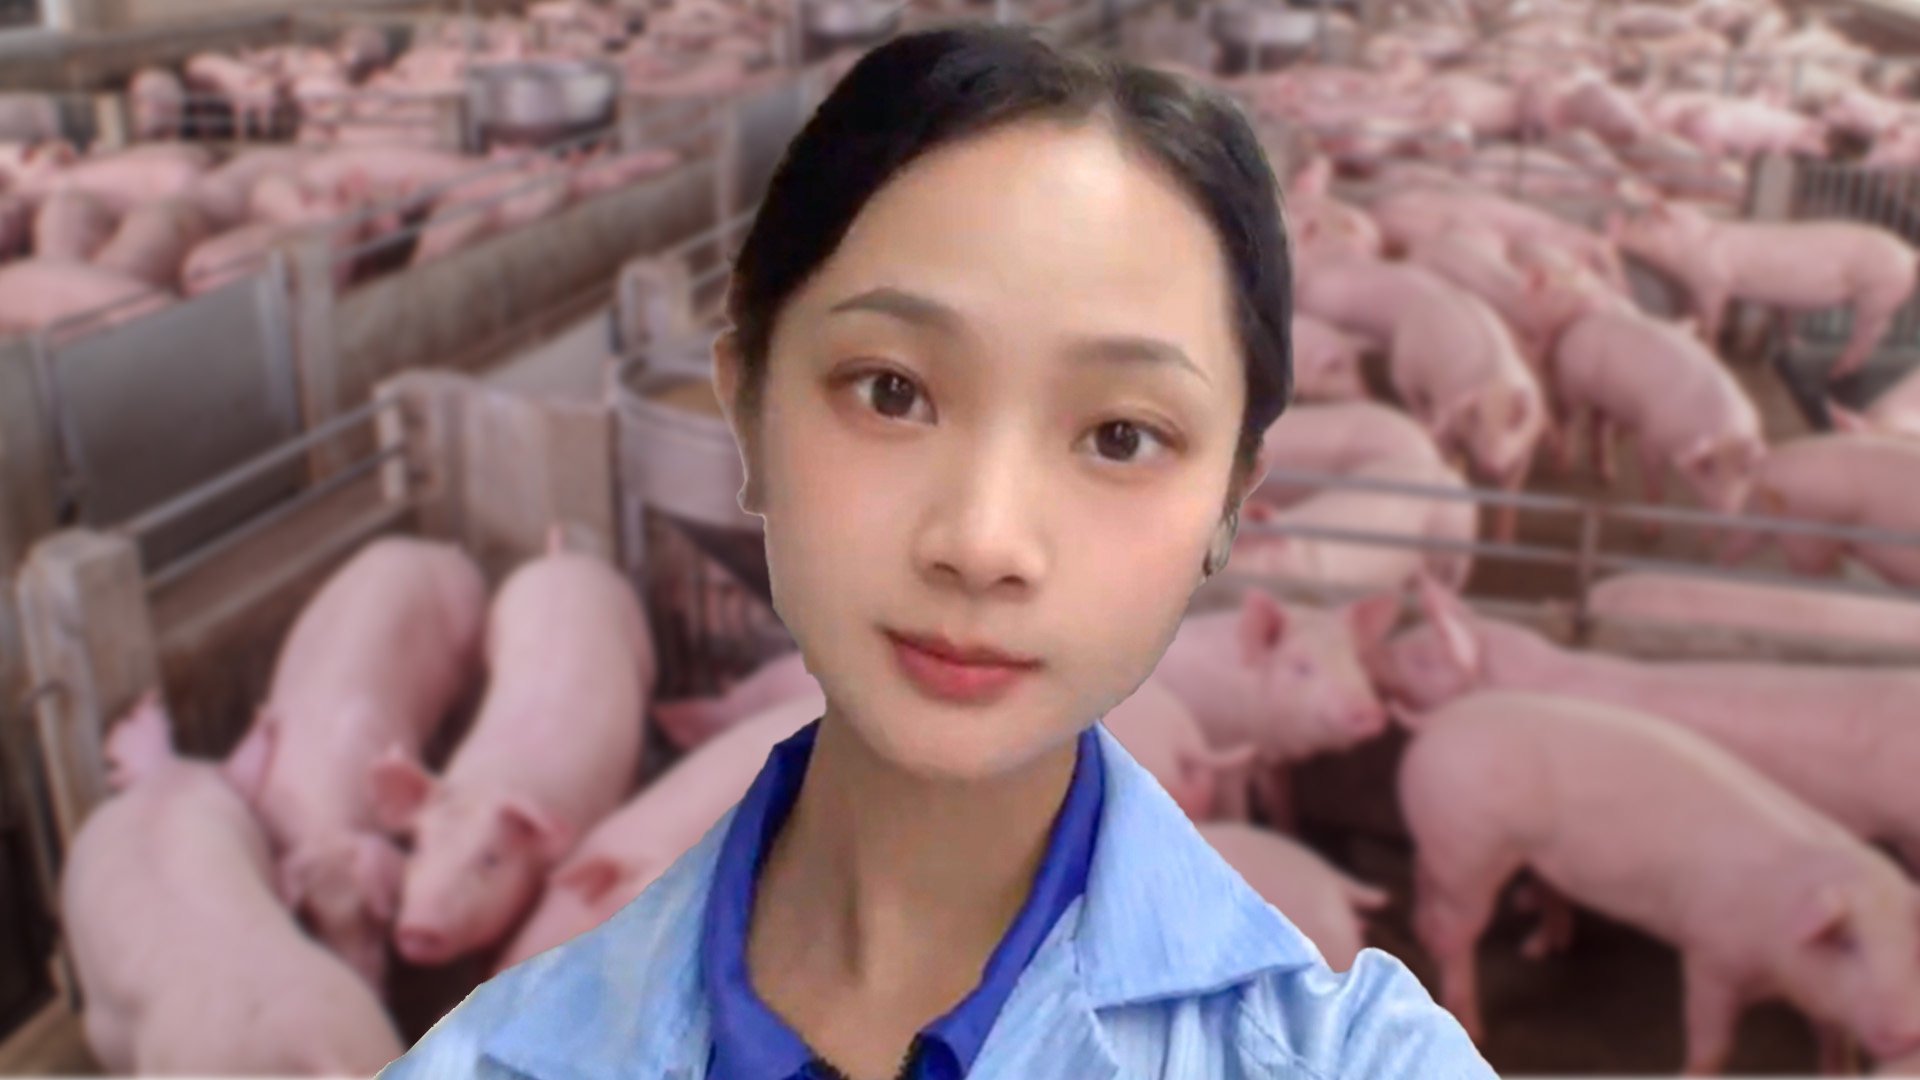 A 26-year-old woman in China has earned praise on mainland social media after she quit an office job to work on a pig farm. Photo: SCMP composite/Shutterstock/Douyin